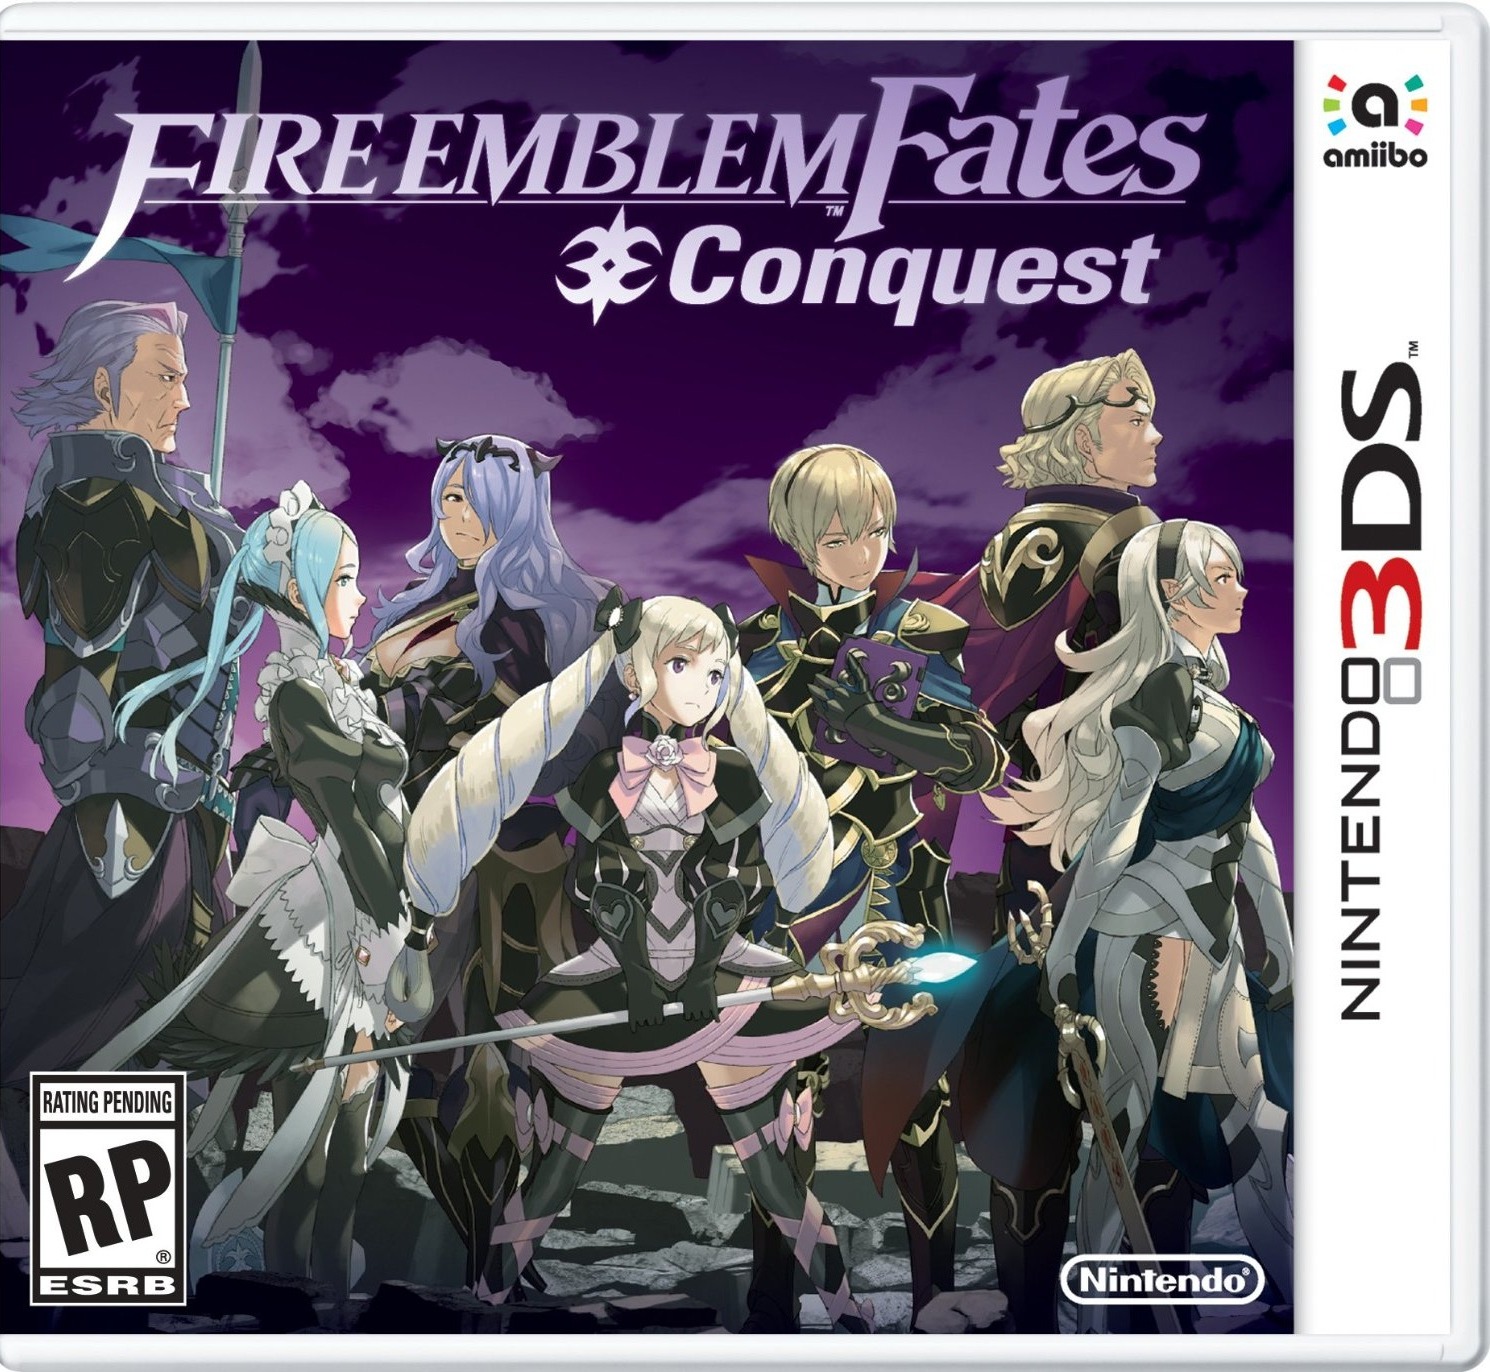 fire emblem engage difficulty differences